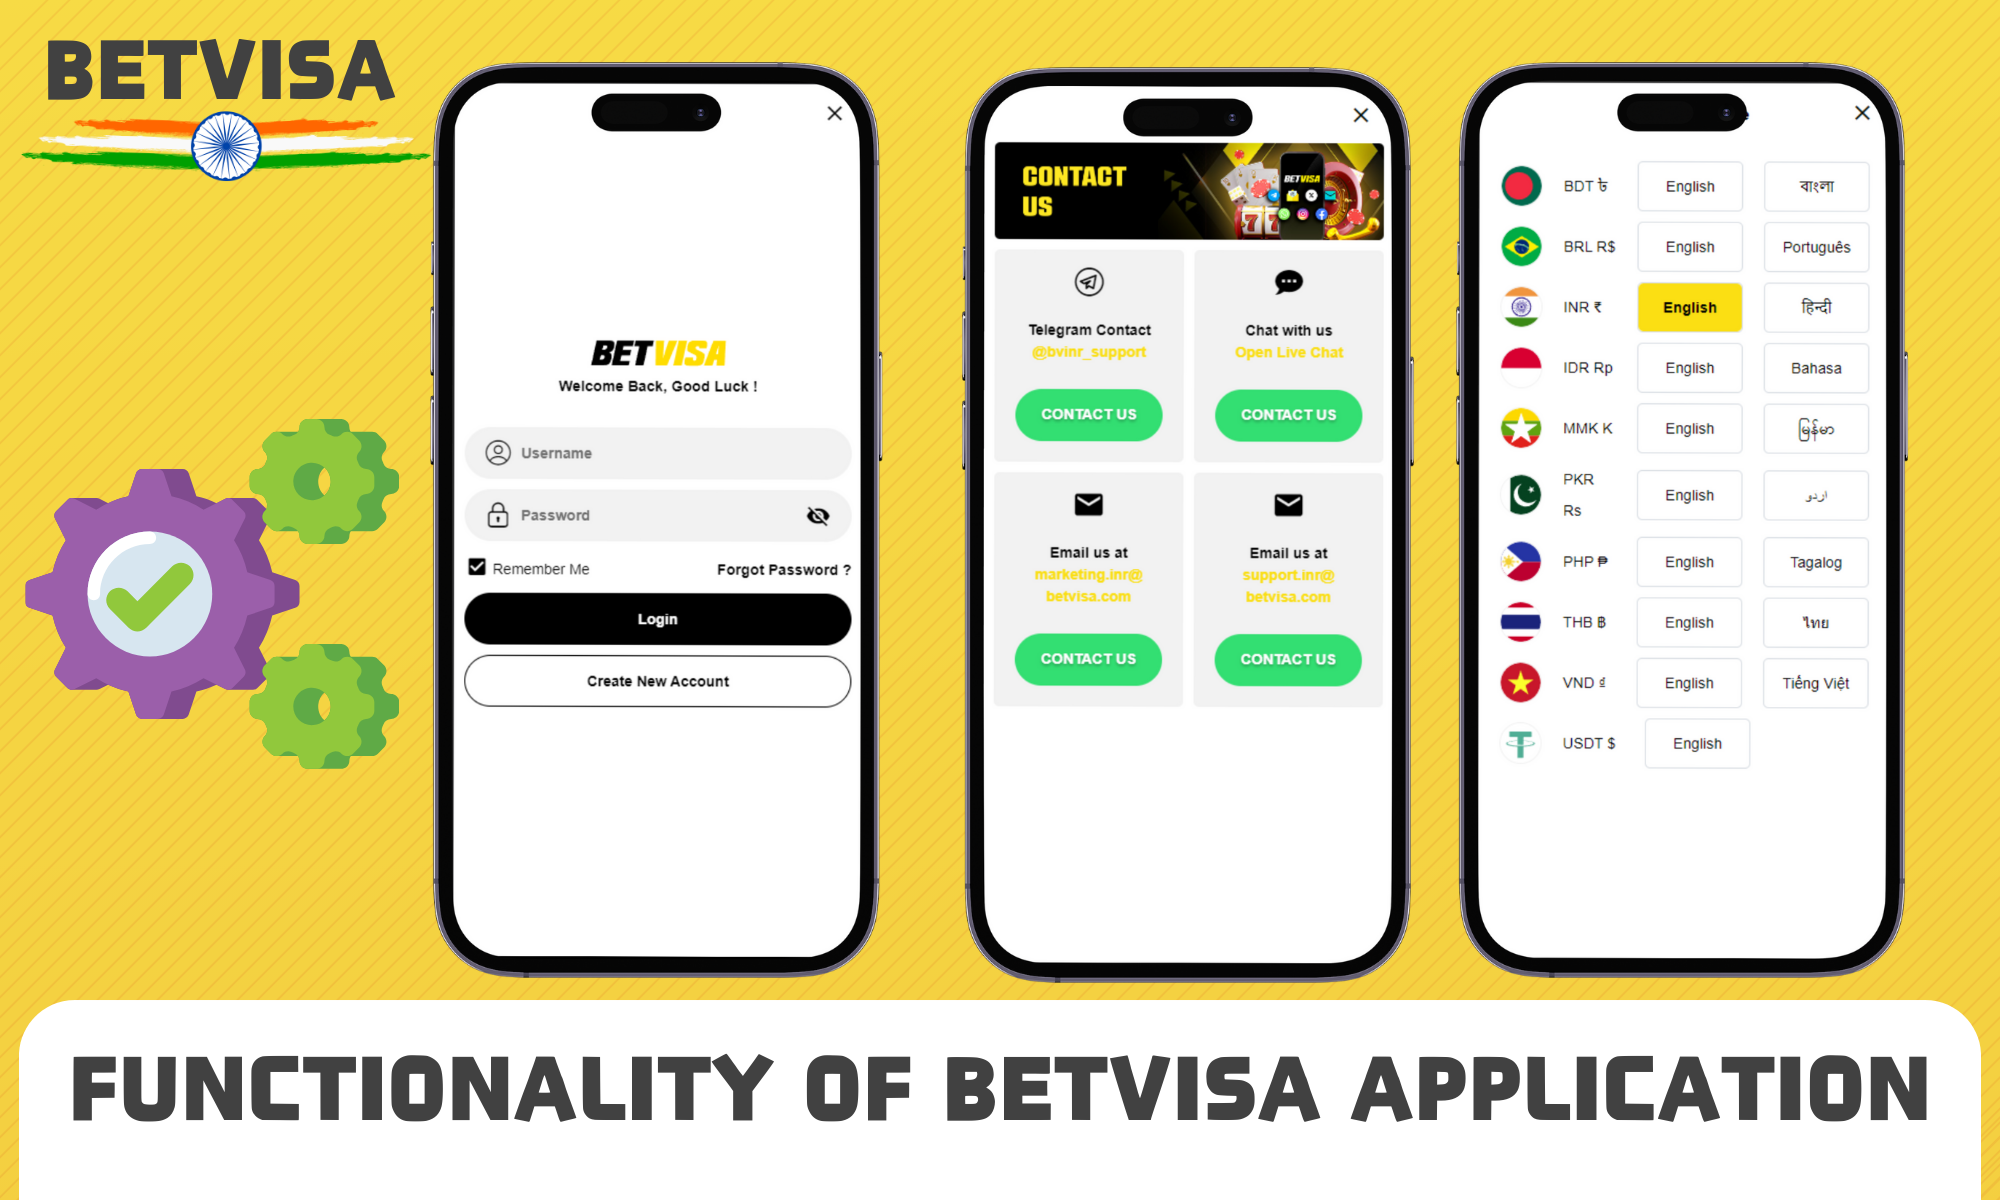 The list of features available in the Betvisa app